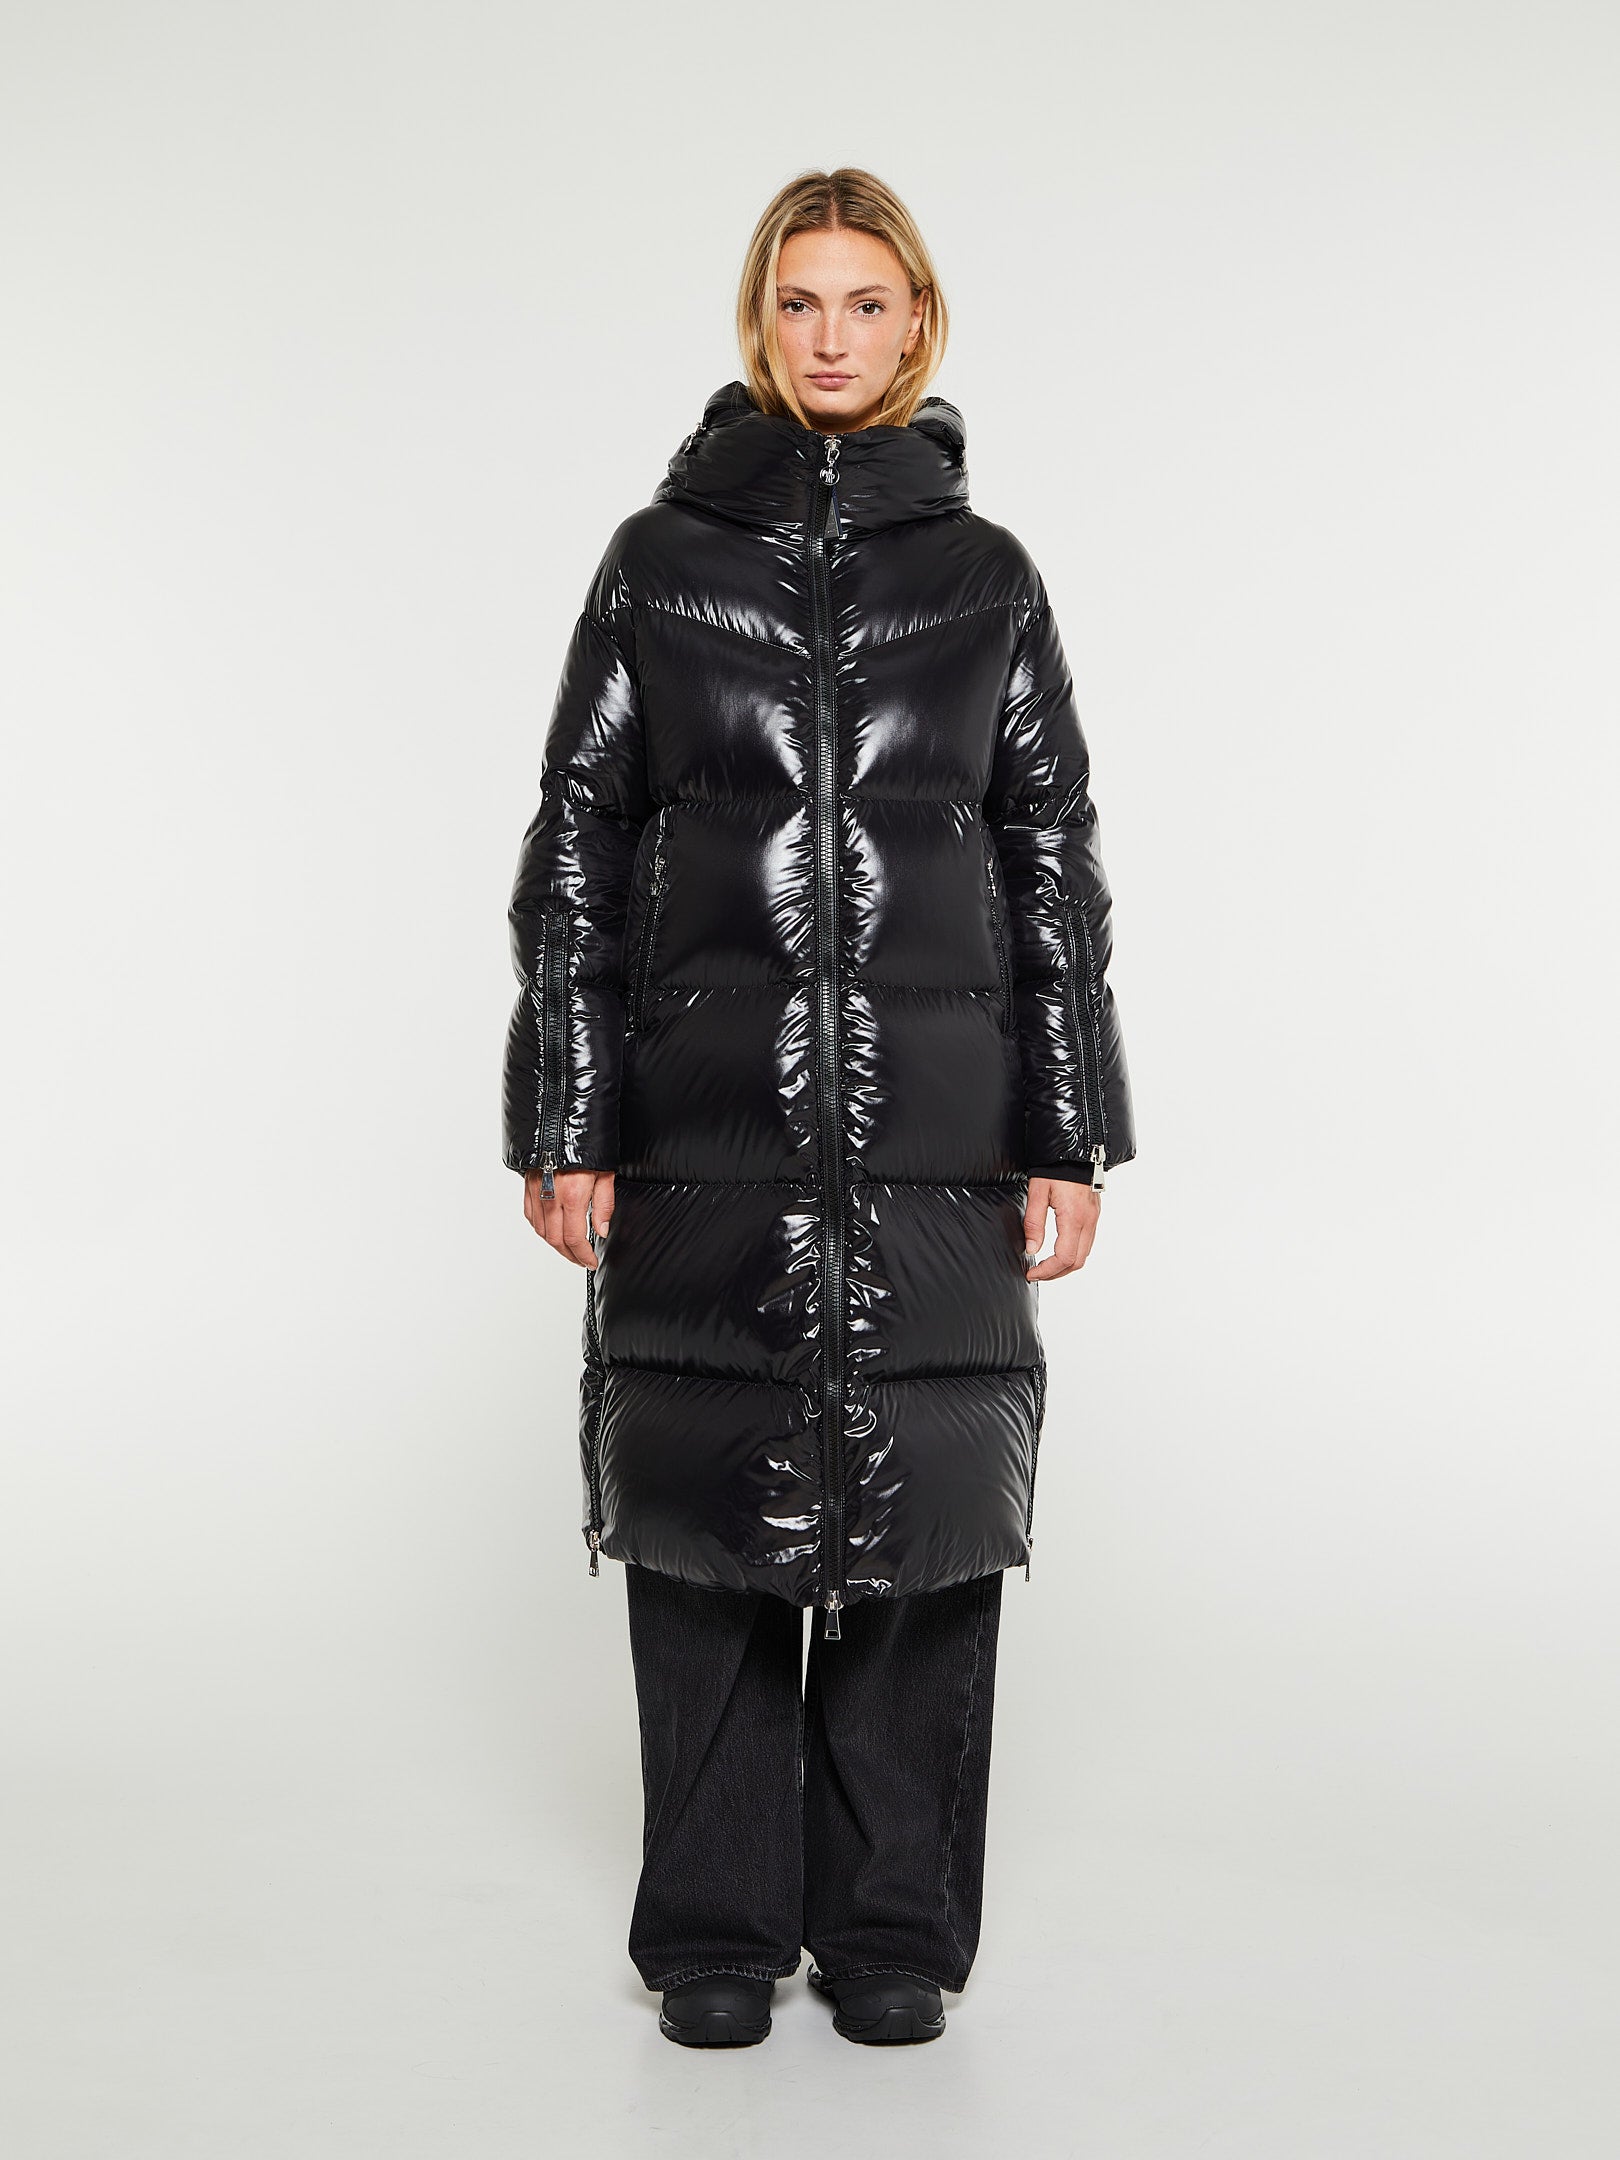 Coats & Jackets for at stoy selection | women Shop the